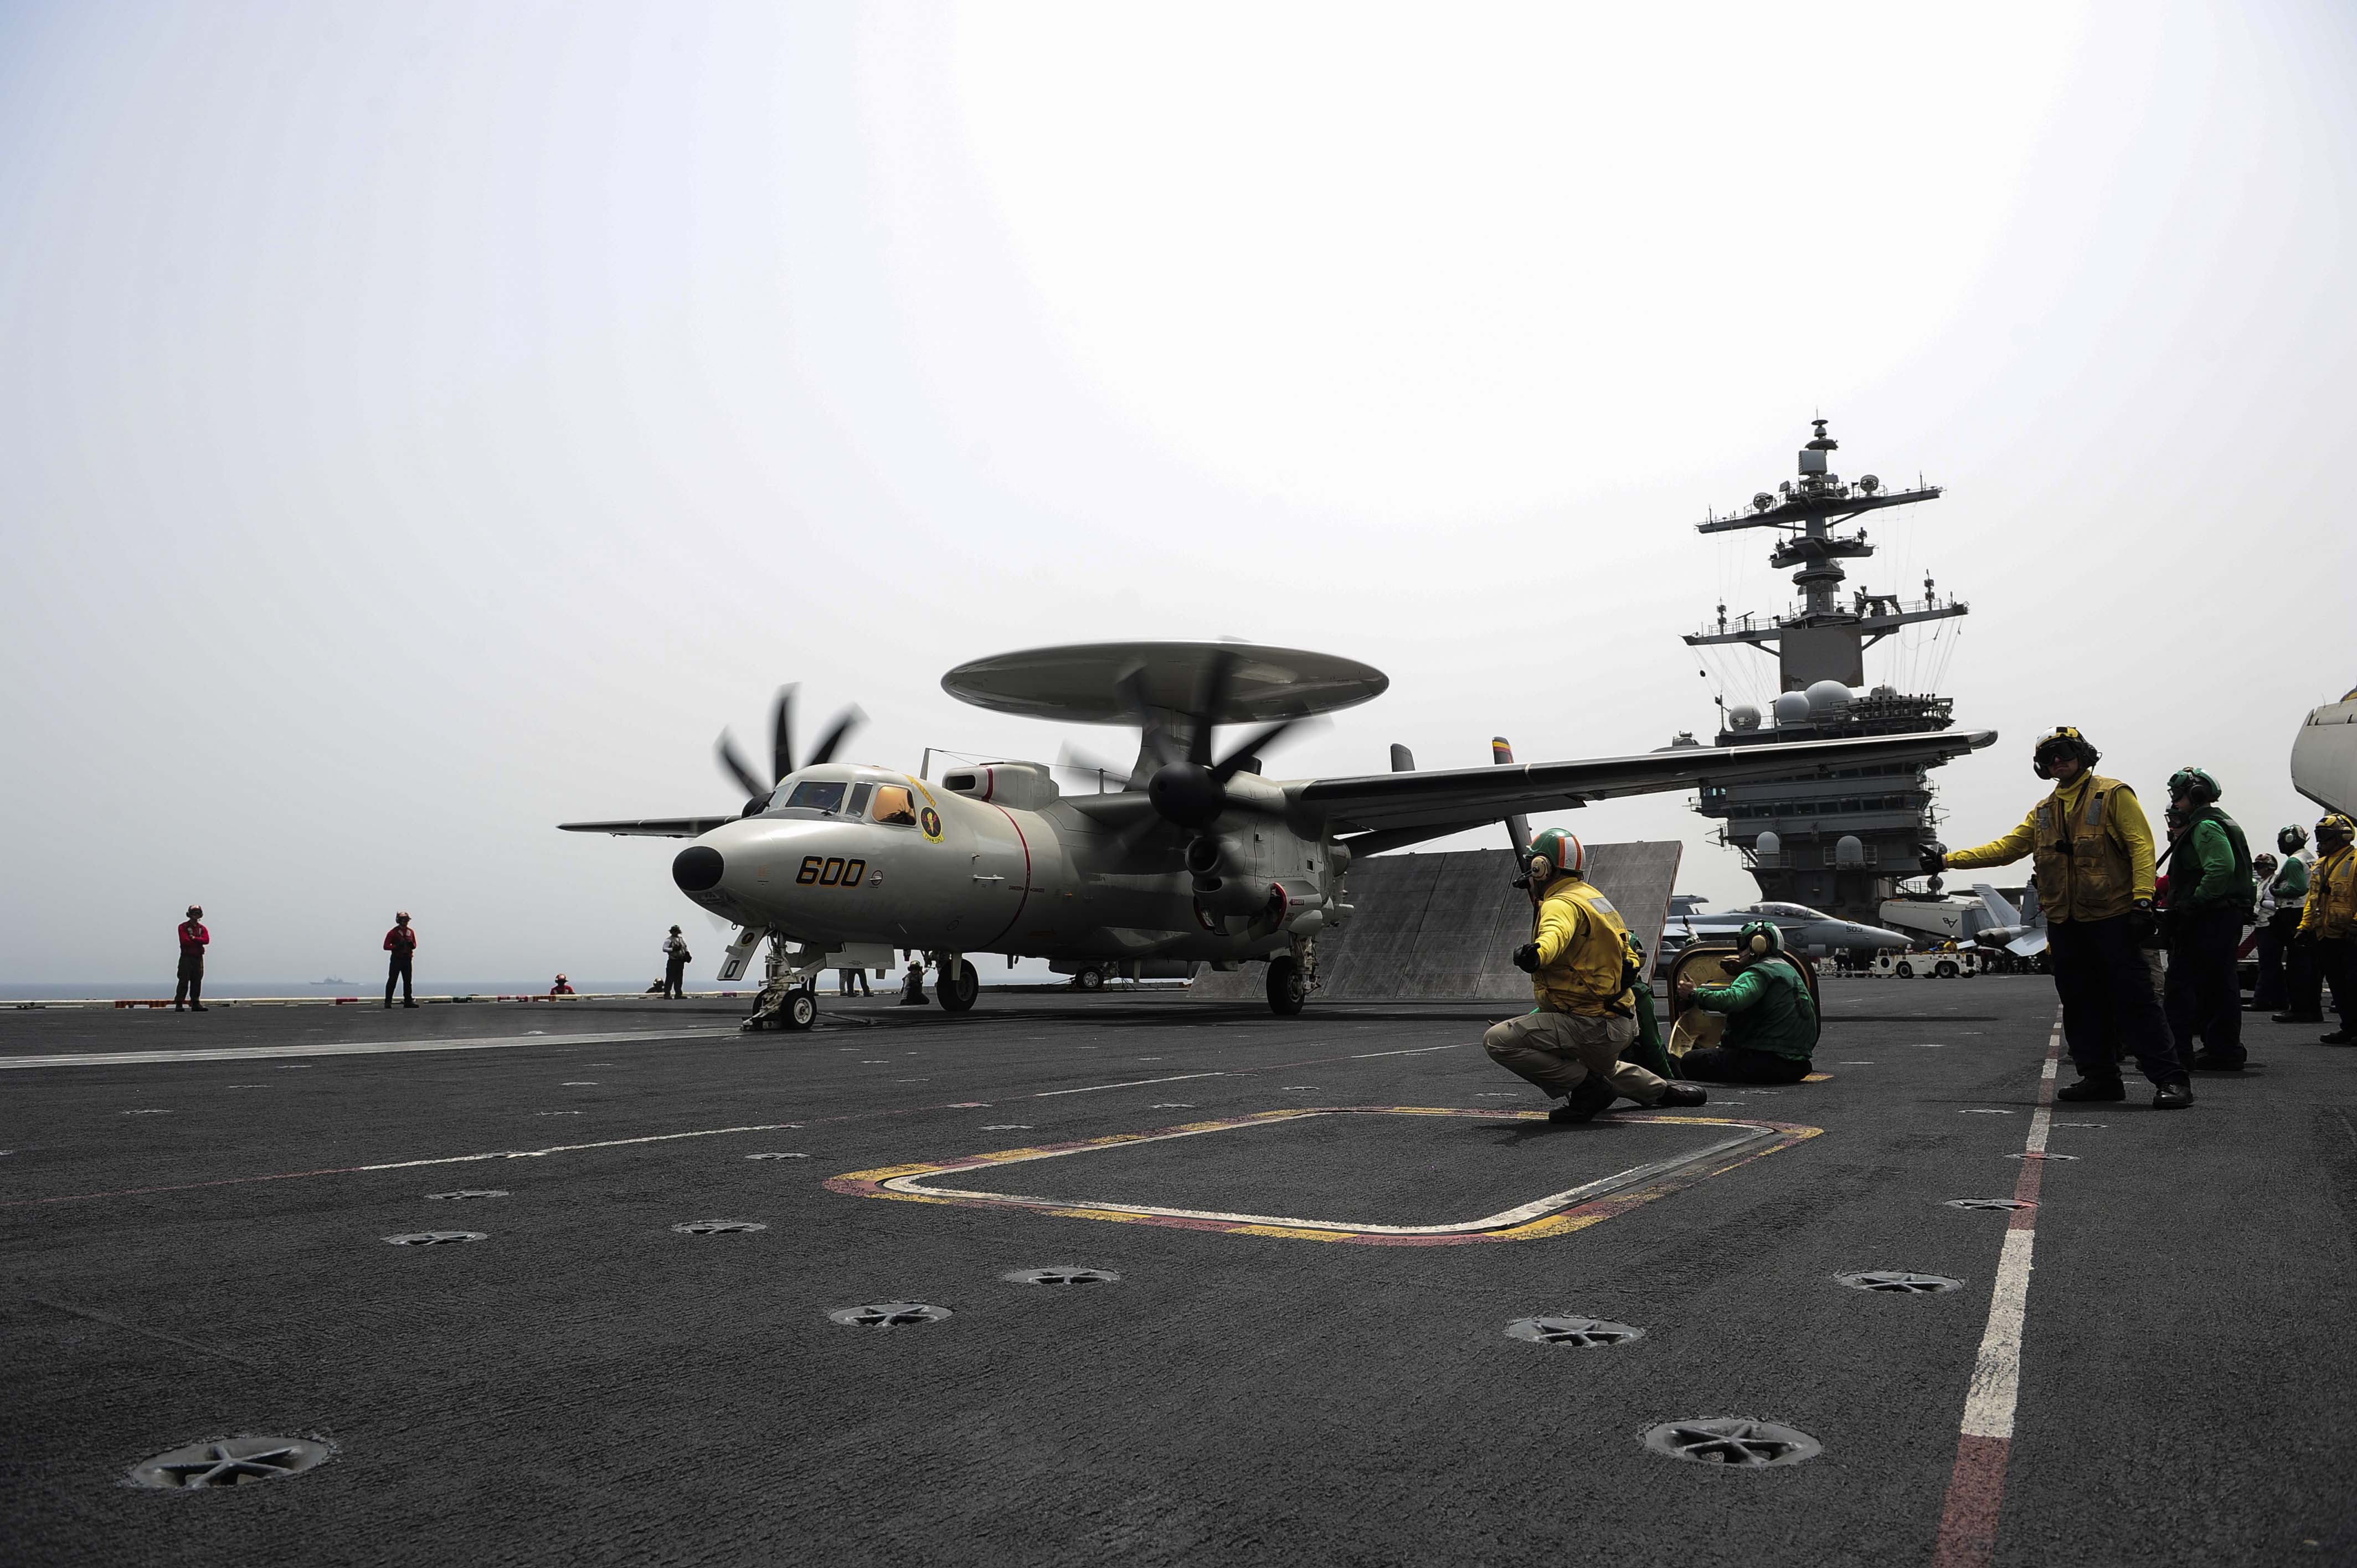 An E-2D Hawkeye, assigned to the Tigertails of the Carrier Airborne Early Warning Squadron (VAW) 125, prepares to launch from the flight deck of the aircraft carrier USS Theodore Roosevelt (CVN 71) on April 28, 2015, while operating in U.S. 5th Fleet area of operations. US Navy photo.